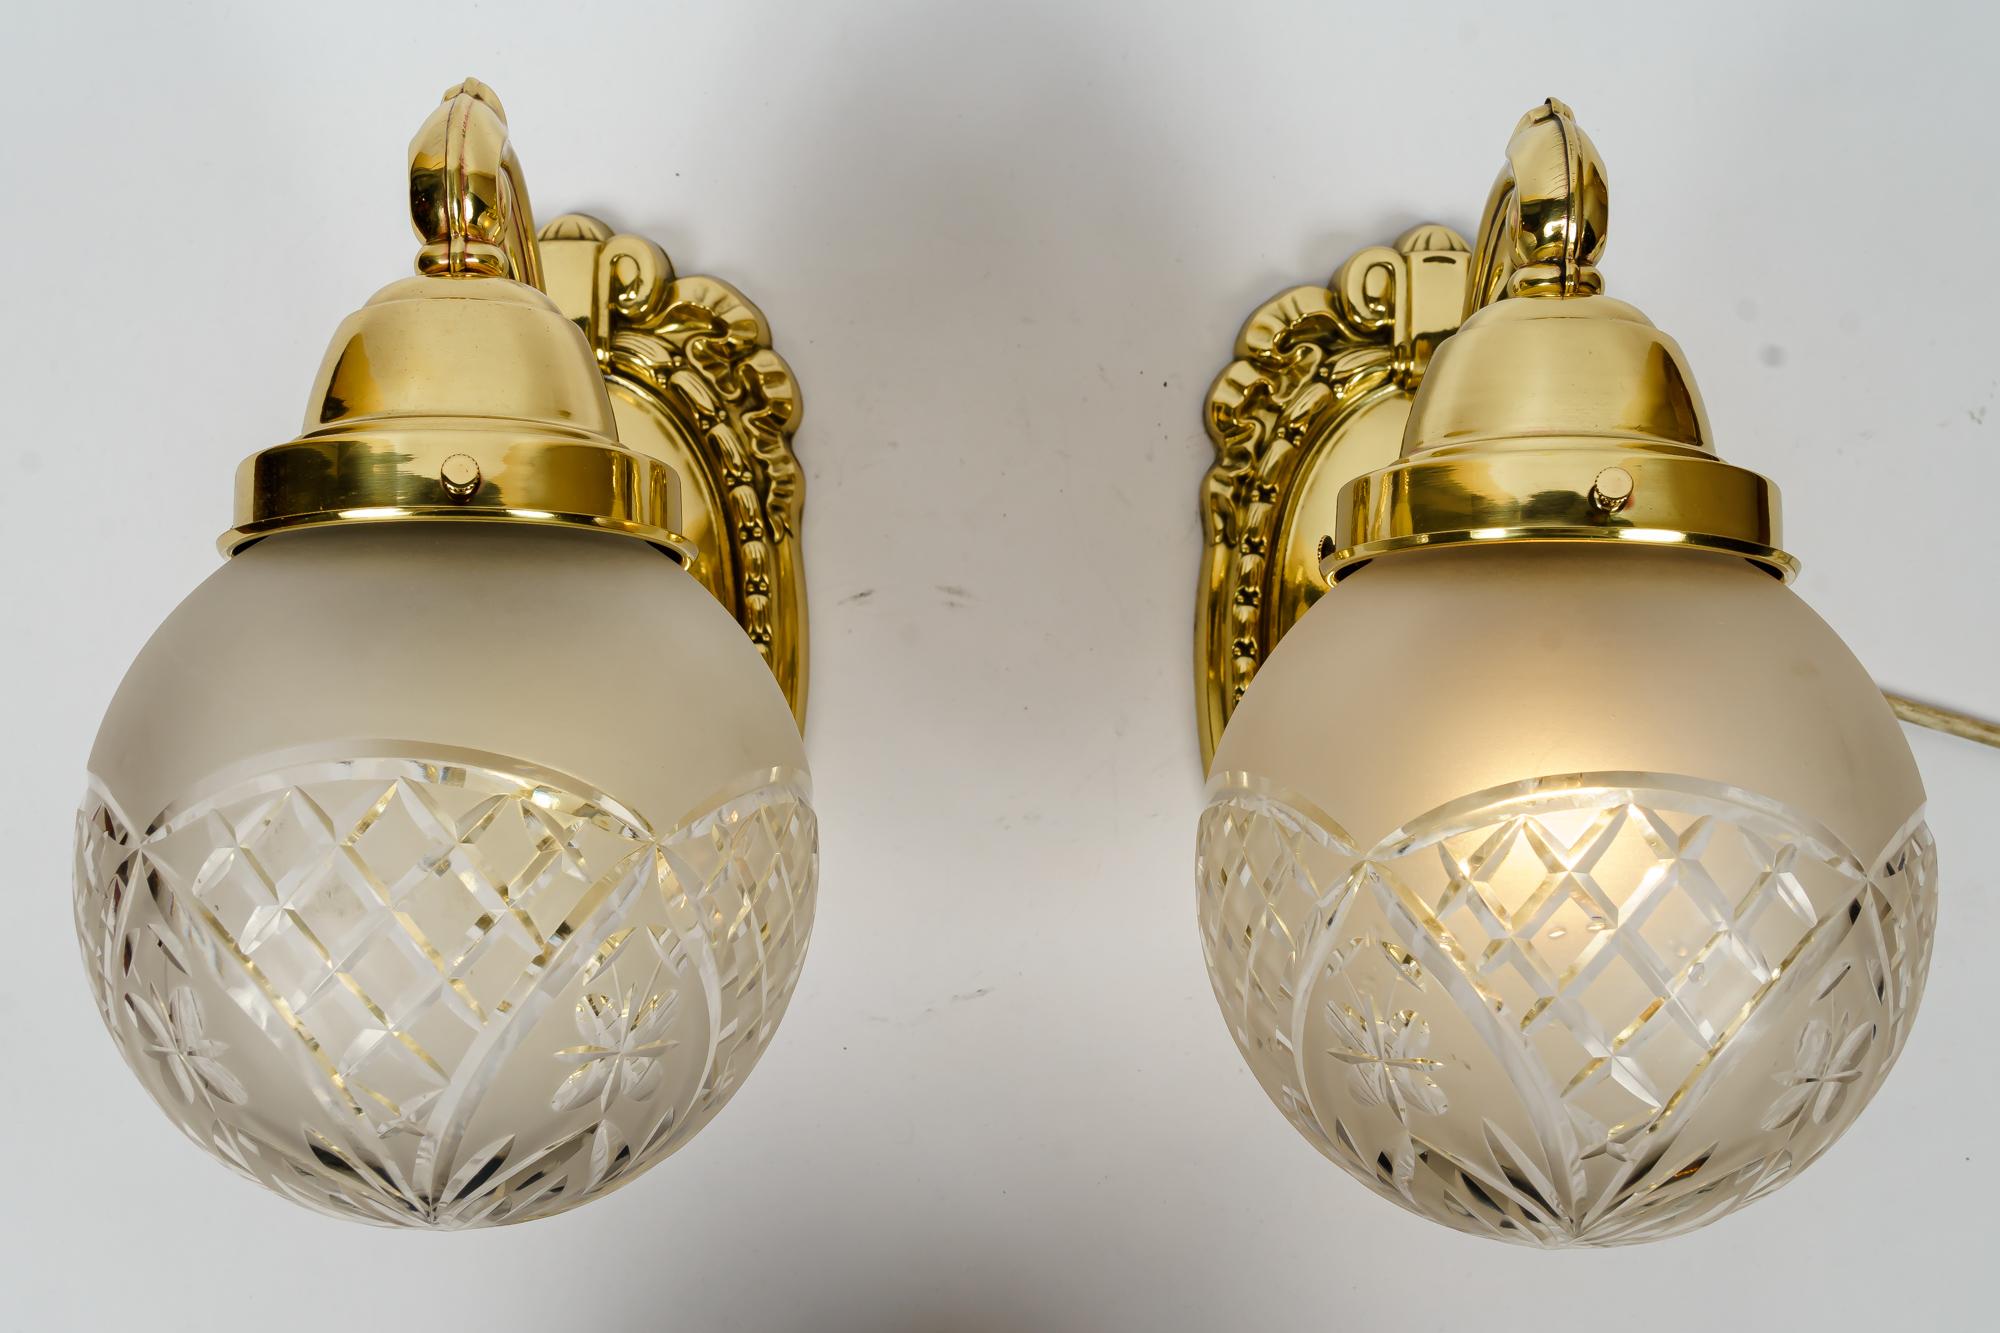 Two historistic wall lamps vienna around 1920s
Polished and stove enameled
Original cut glass shades.